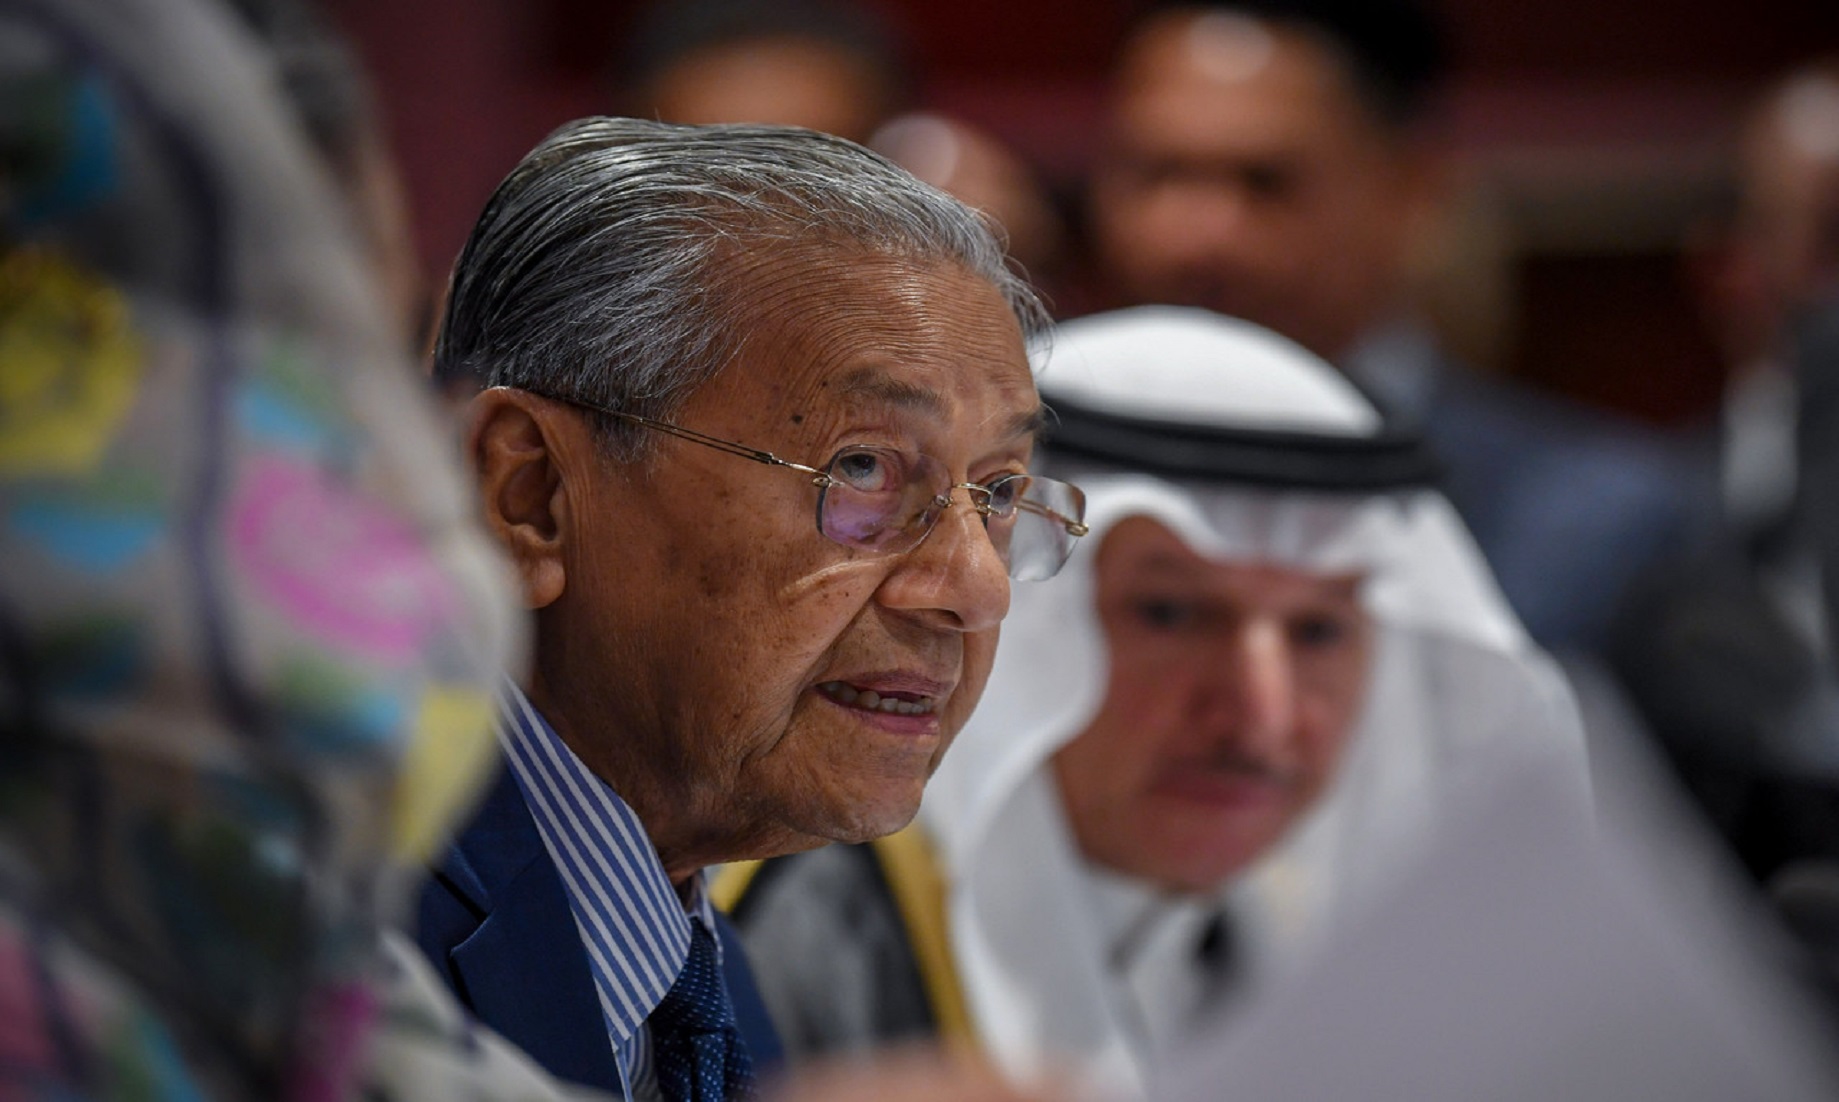 Dr Mahathir calls for an end to Rohingya crisis